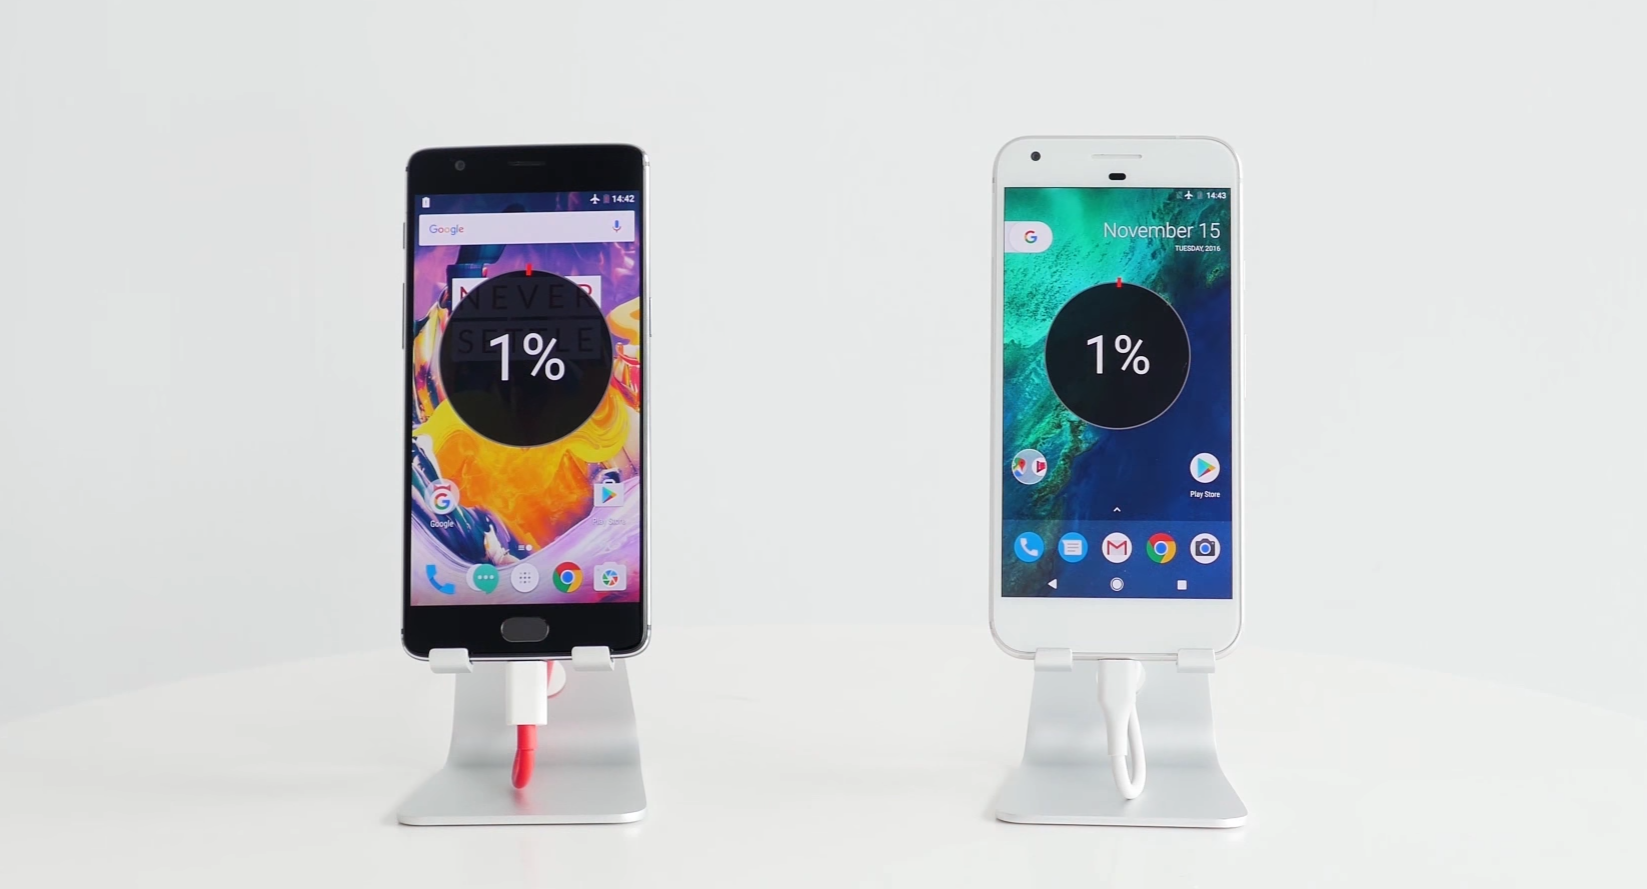 OnePlus shows how fast its OnePlus 3T charges compared to the Google Pixel XL